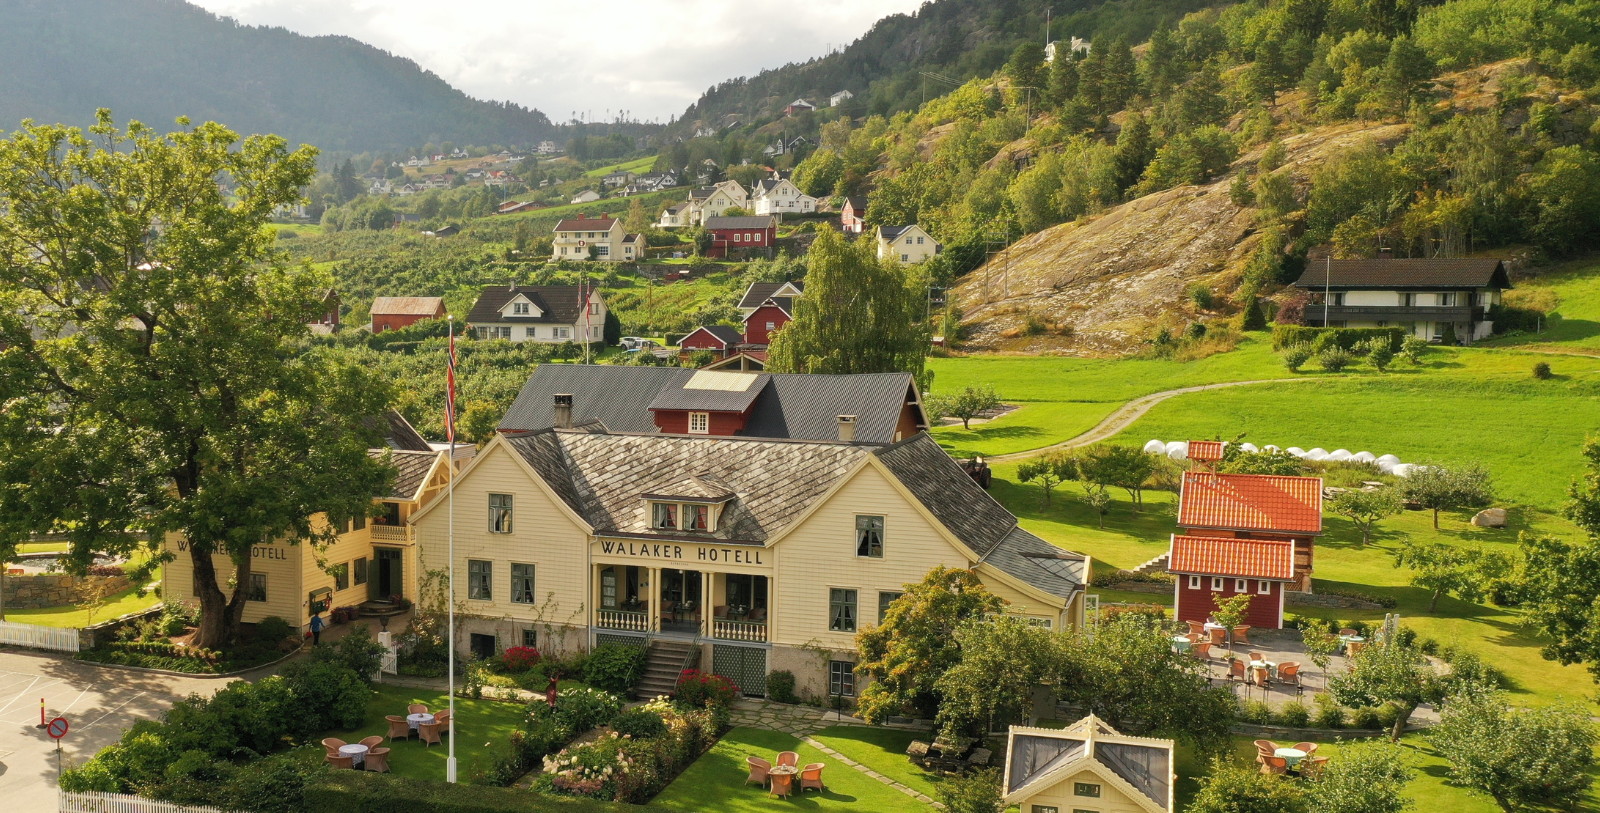 Image of aerial view of Walaker Hotell, 1640, Member of Historic Hotels Worldwide since 2023, in Solvorn, Norway